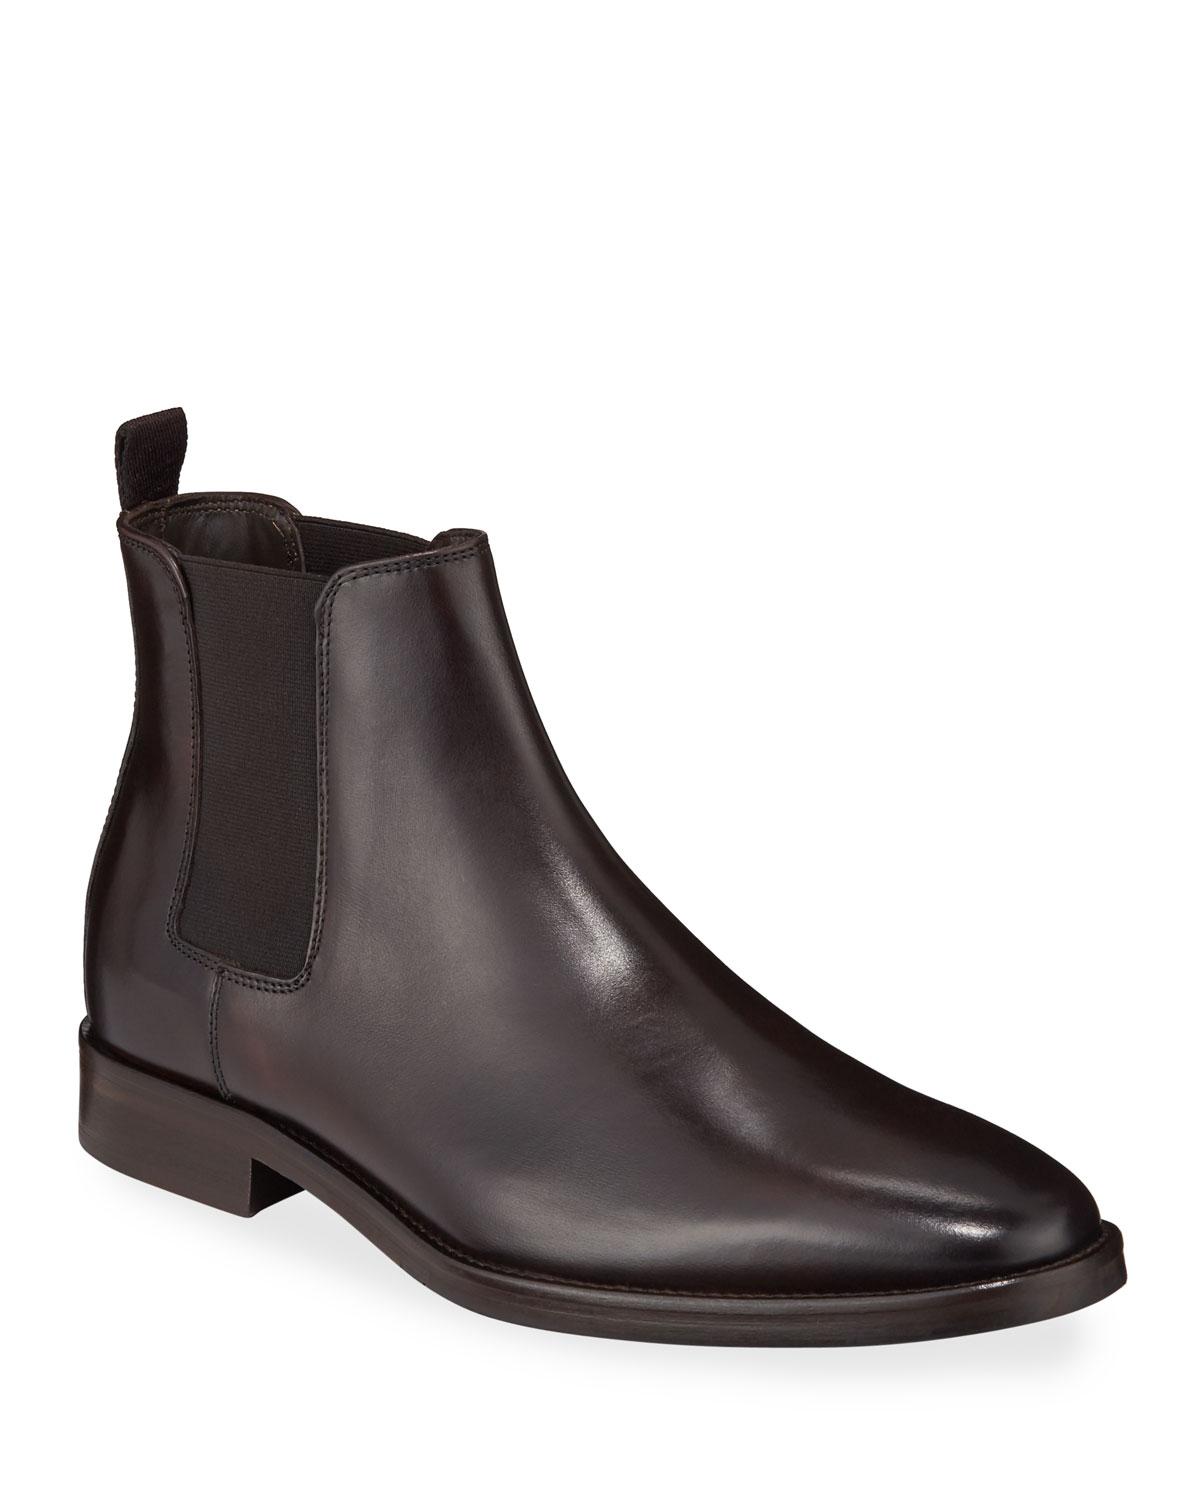 Bruno Magli Men's Cuneo Leather Chelsea Boots in Dark Brown (Brown) for ...